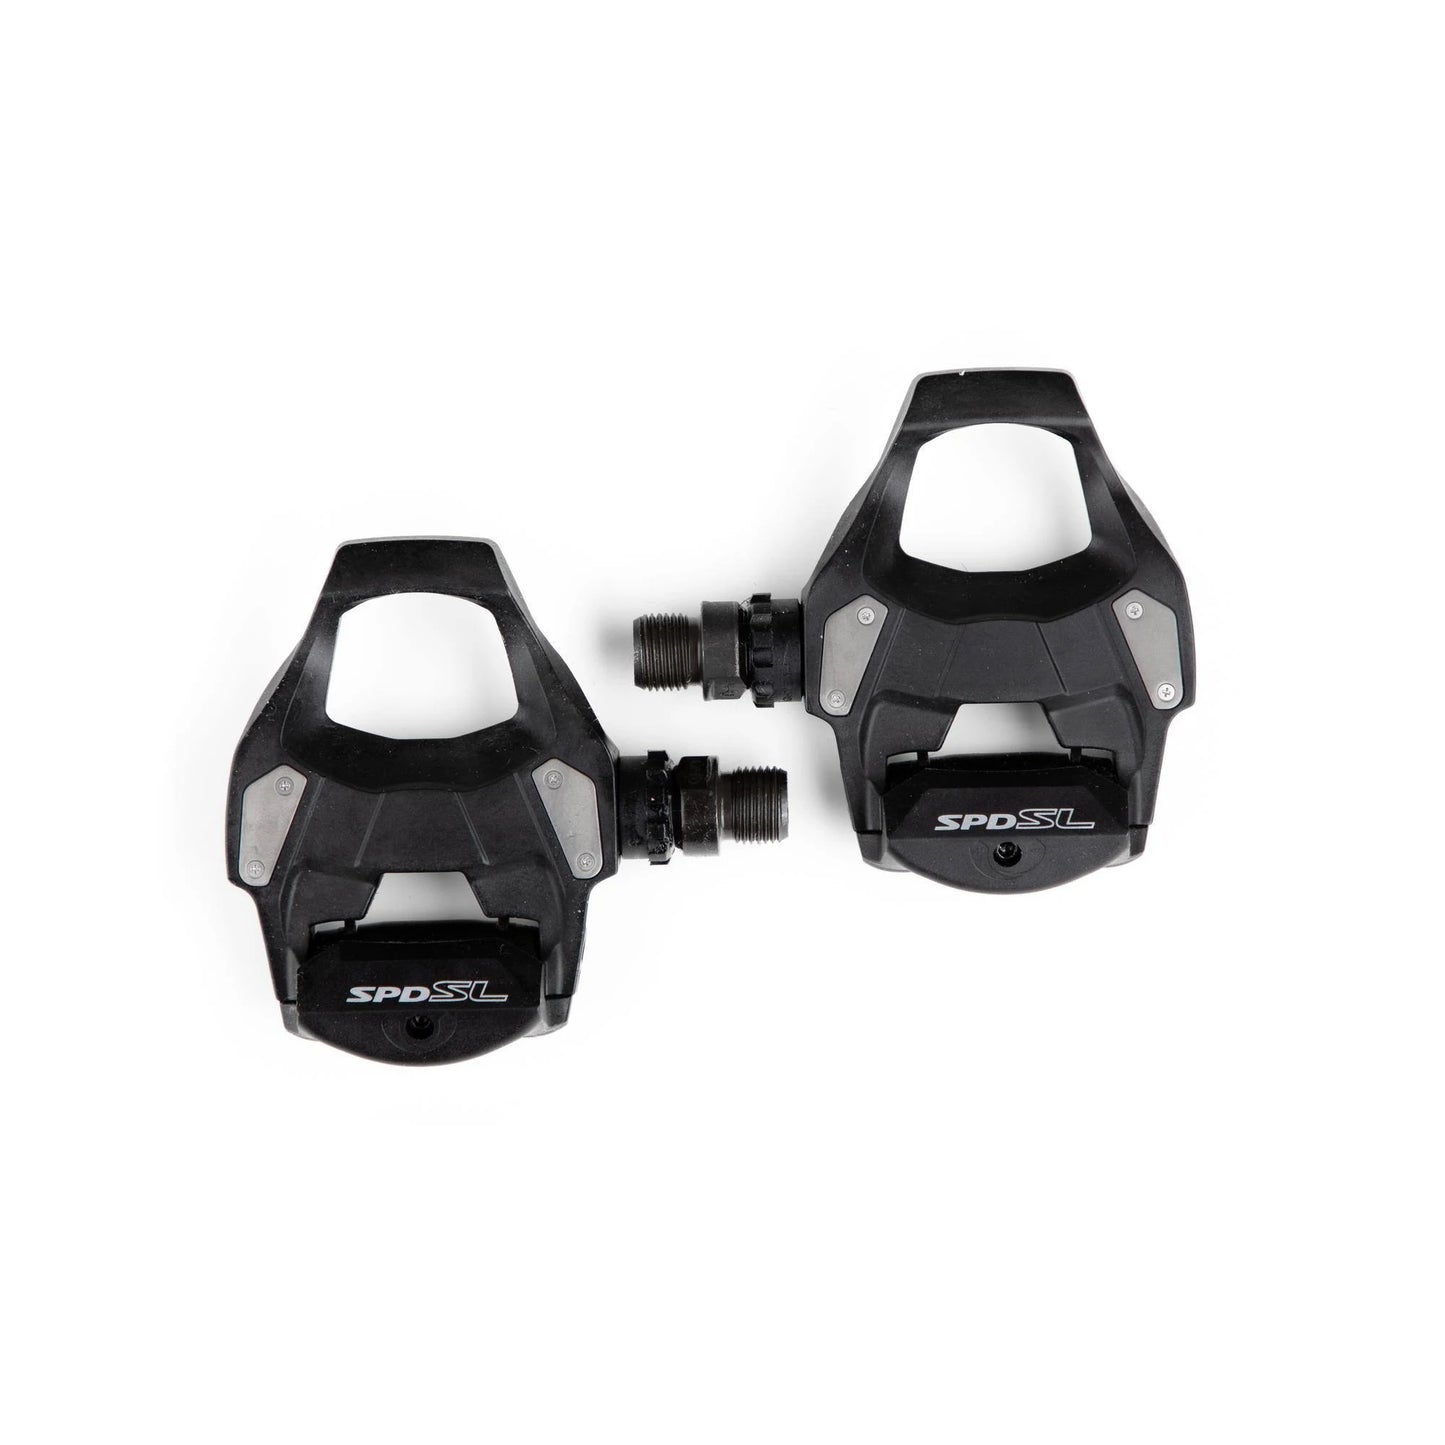 SHIMANO Pair of RS500 SPD-SL road pedals black